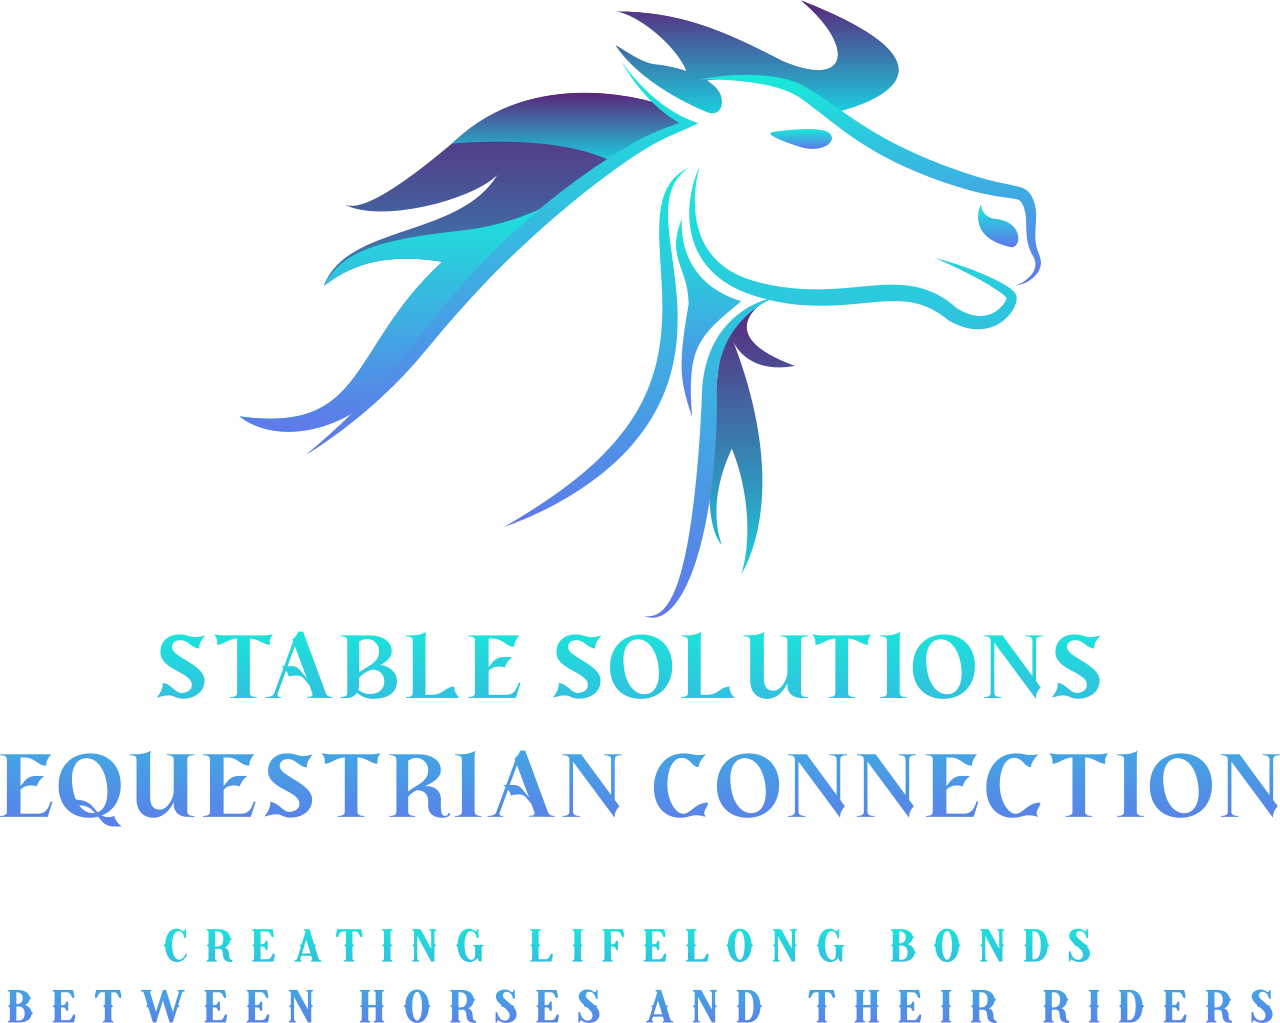 Stable Solutions 
Equestrian Connection's logo